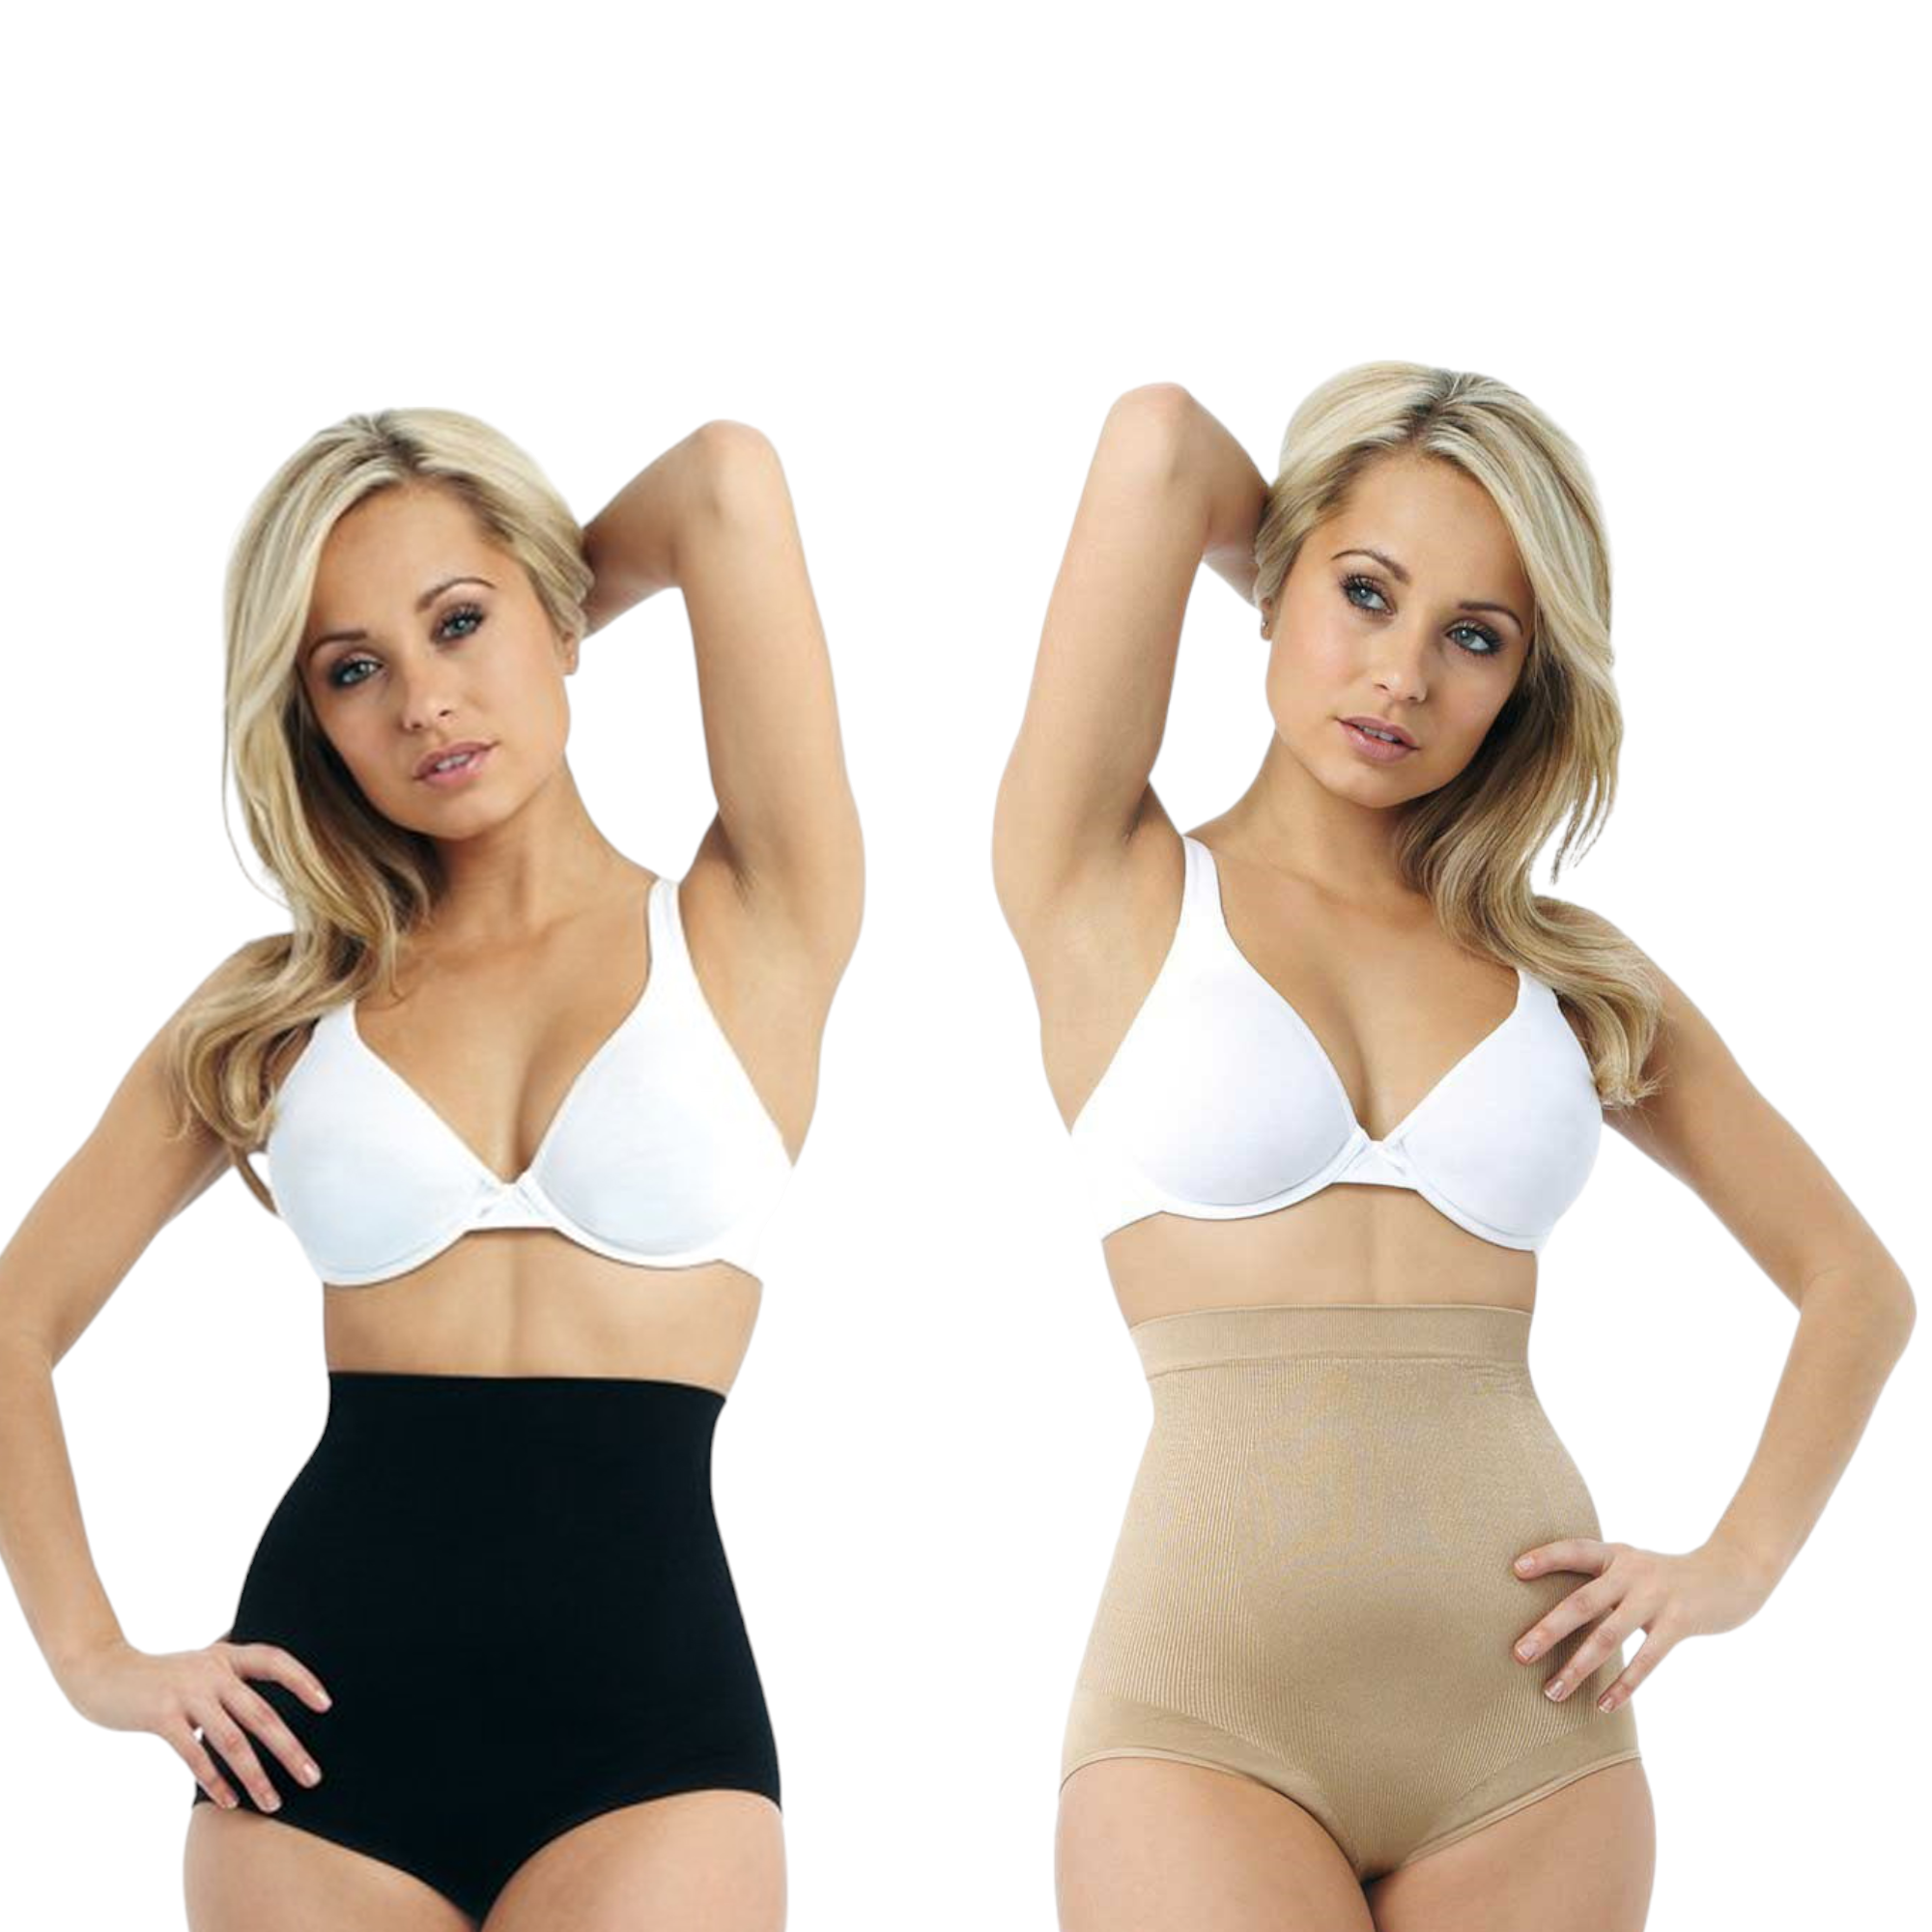 Belvia Comfia Tummy Control Shaping Briefs - Black and Nude -2 Pack -XXL